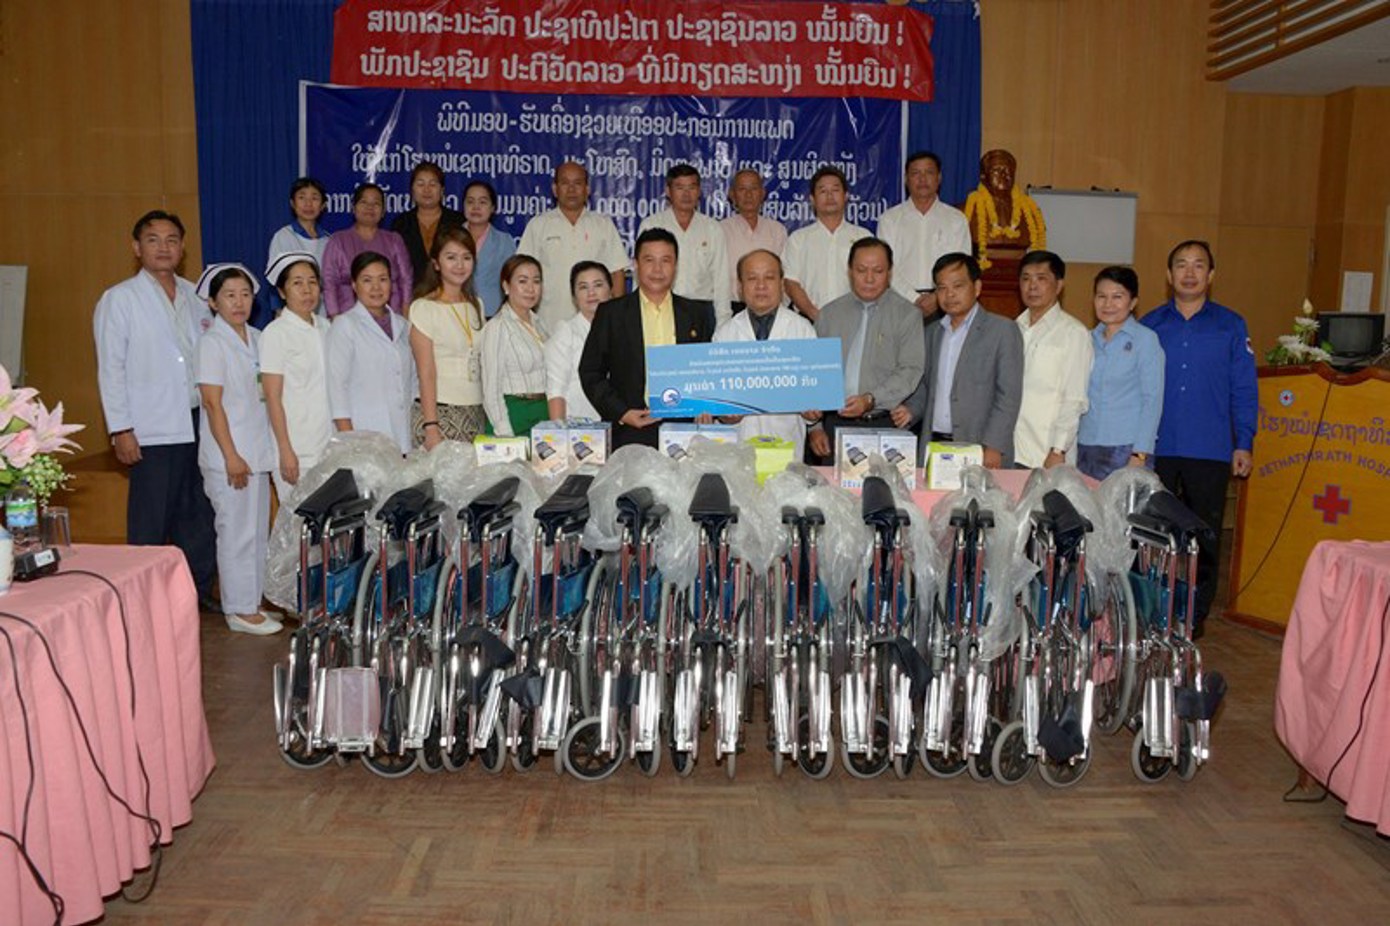 Provided medical equipments for 4 hospitals in Vientiane